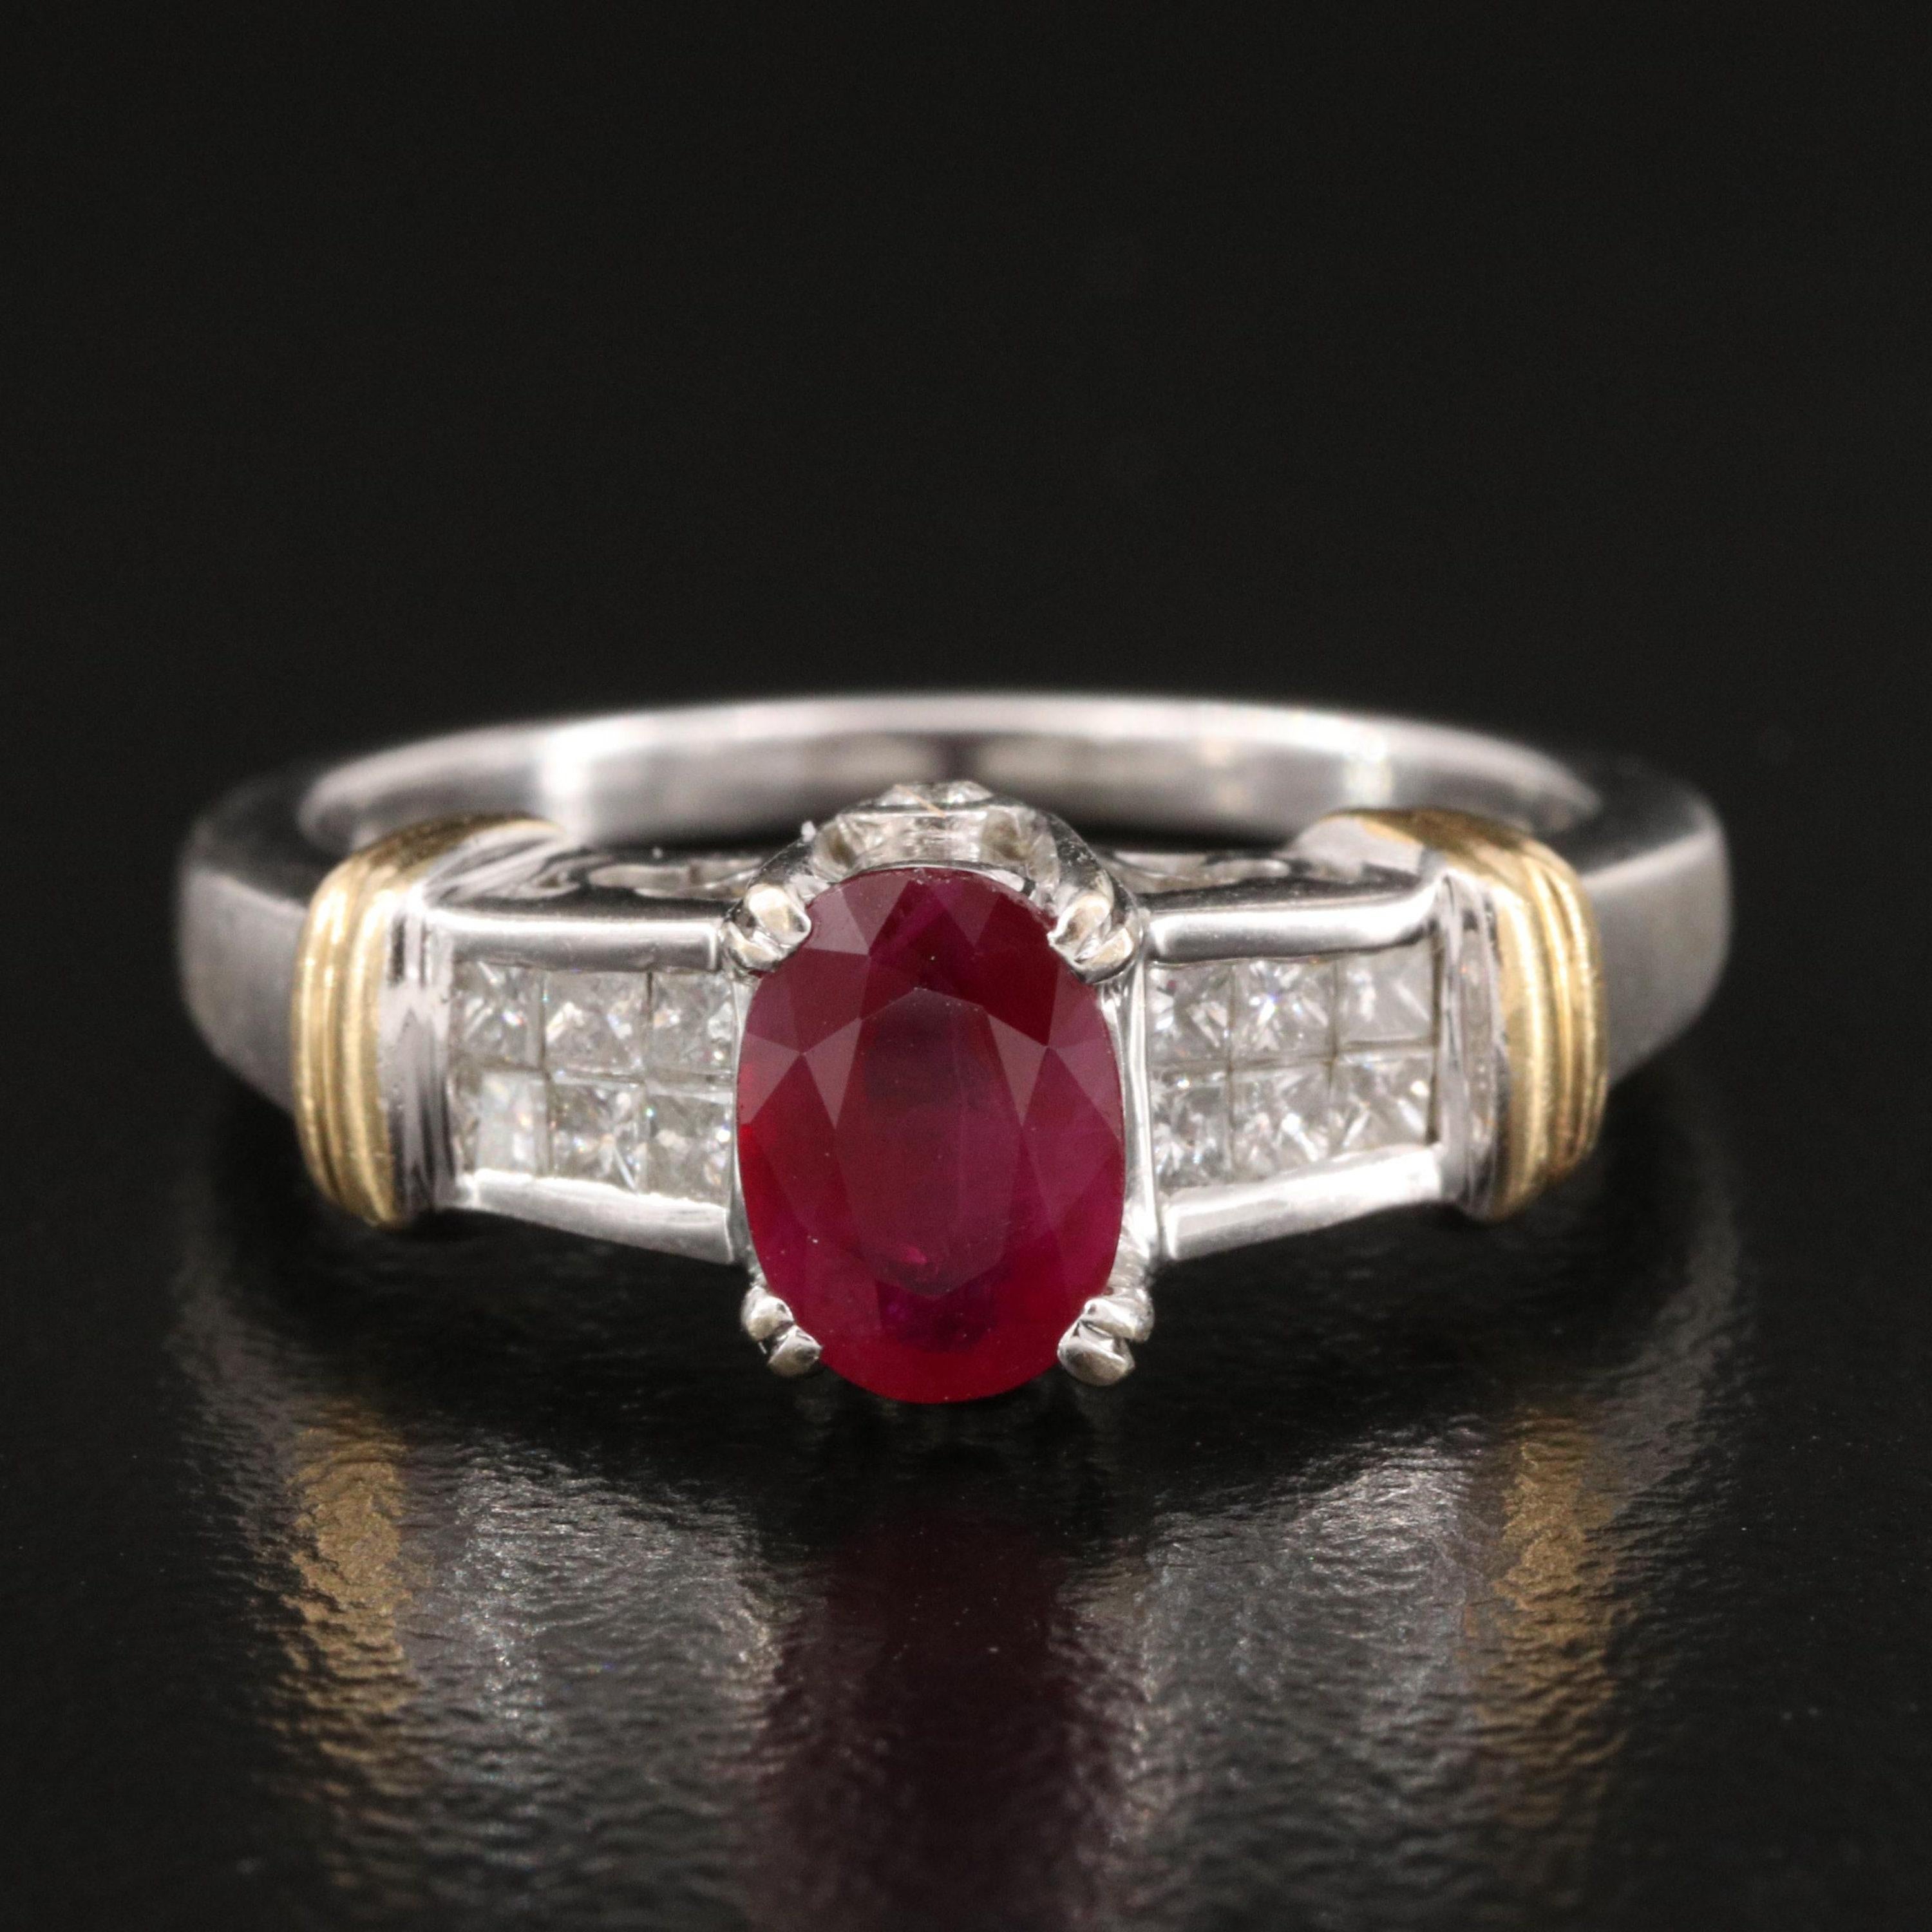 For Sale:  Minimalist Diamond Ruby Engagement Ring, Victorian Ruby White Gold Wedding Ring 3